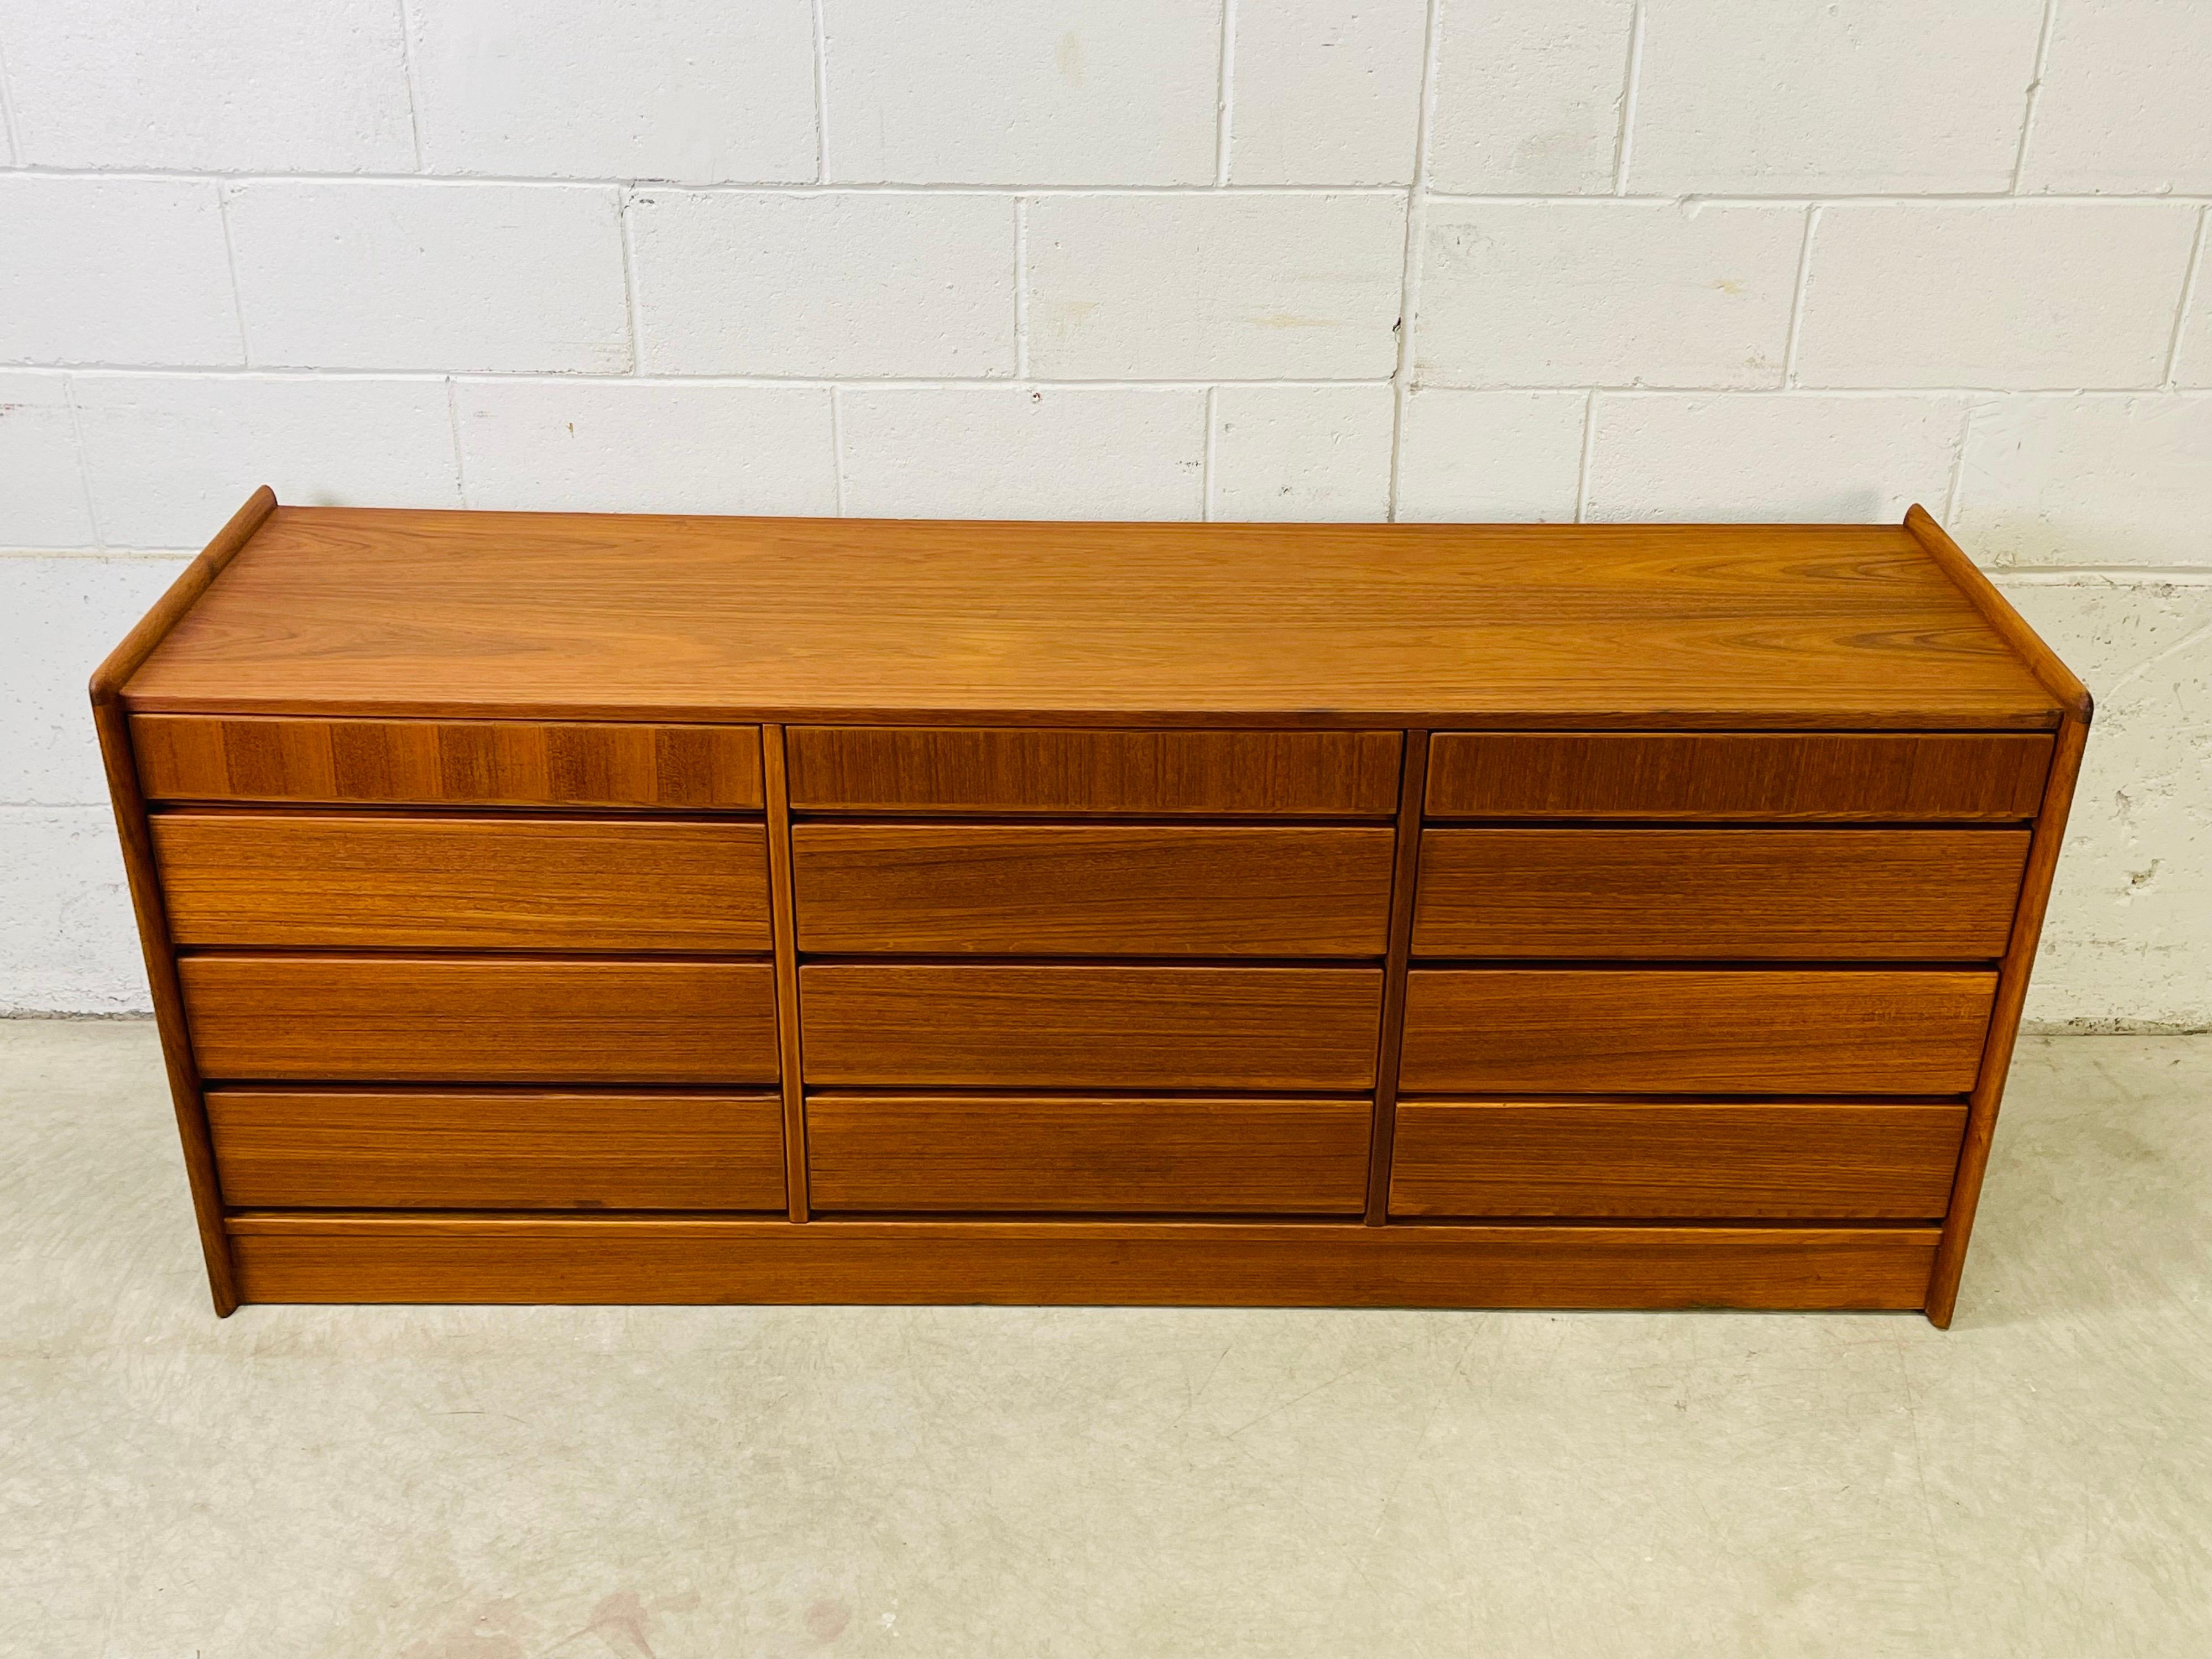 1960s Danish Teak 12 Drawer Low Dresser In Good Condition For Sale In Amherst, NH